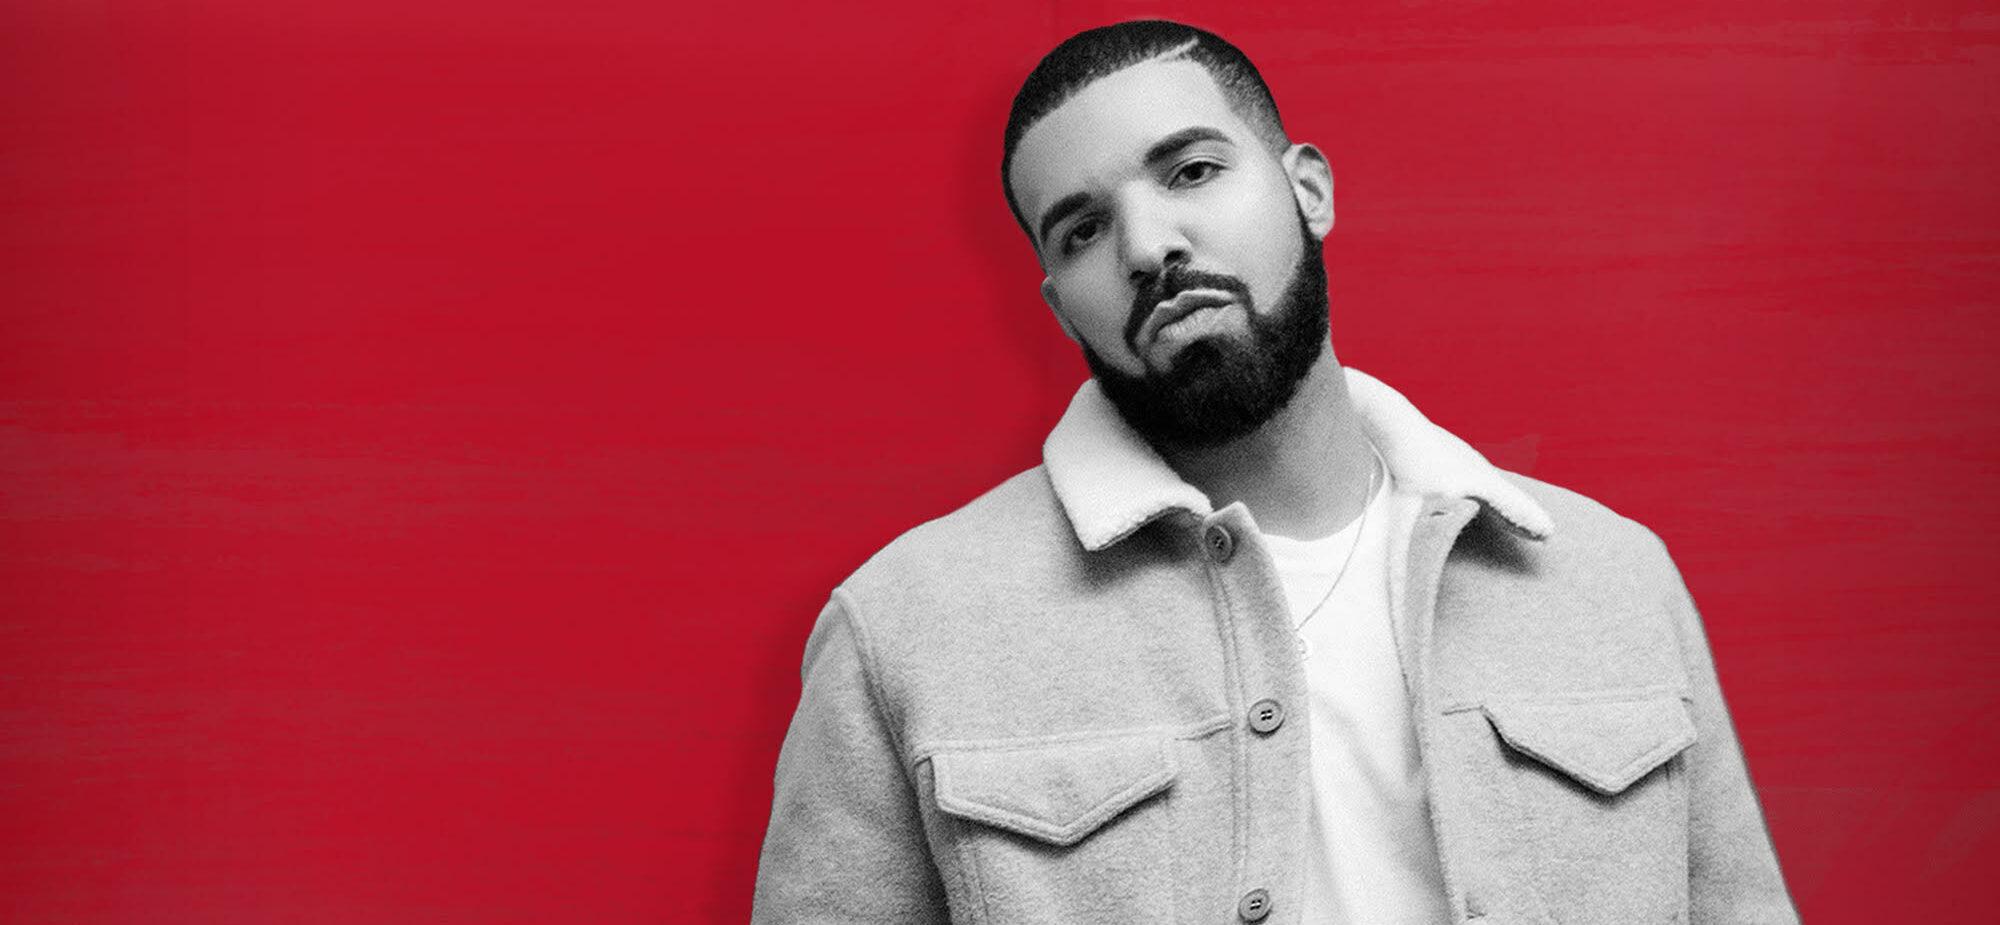 A photo showing Drake leaning against a red background.